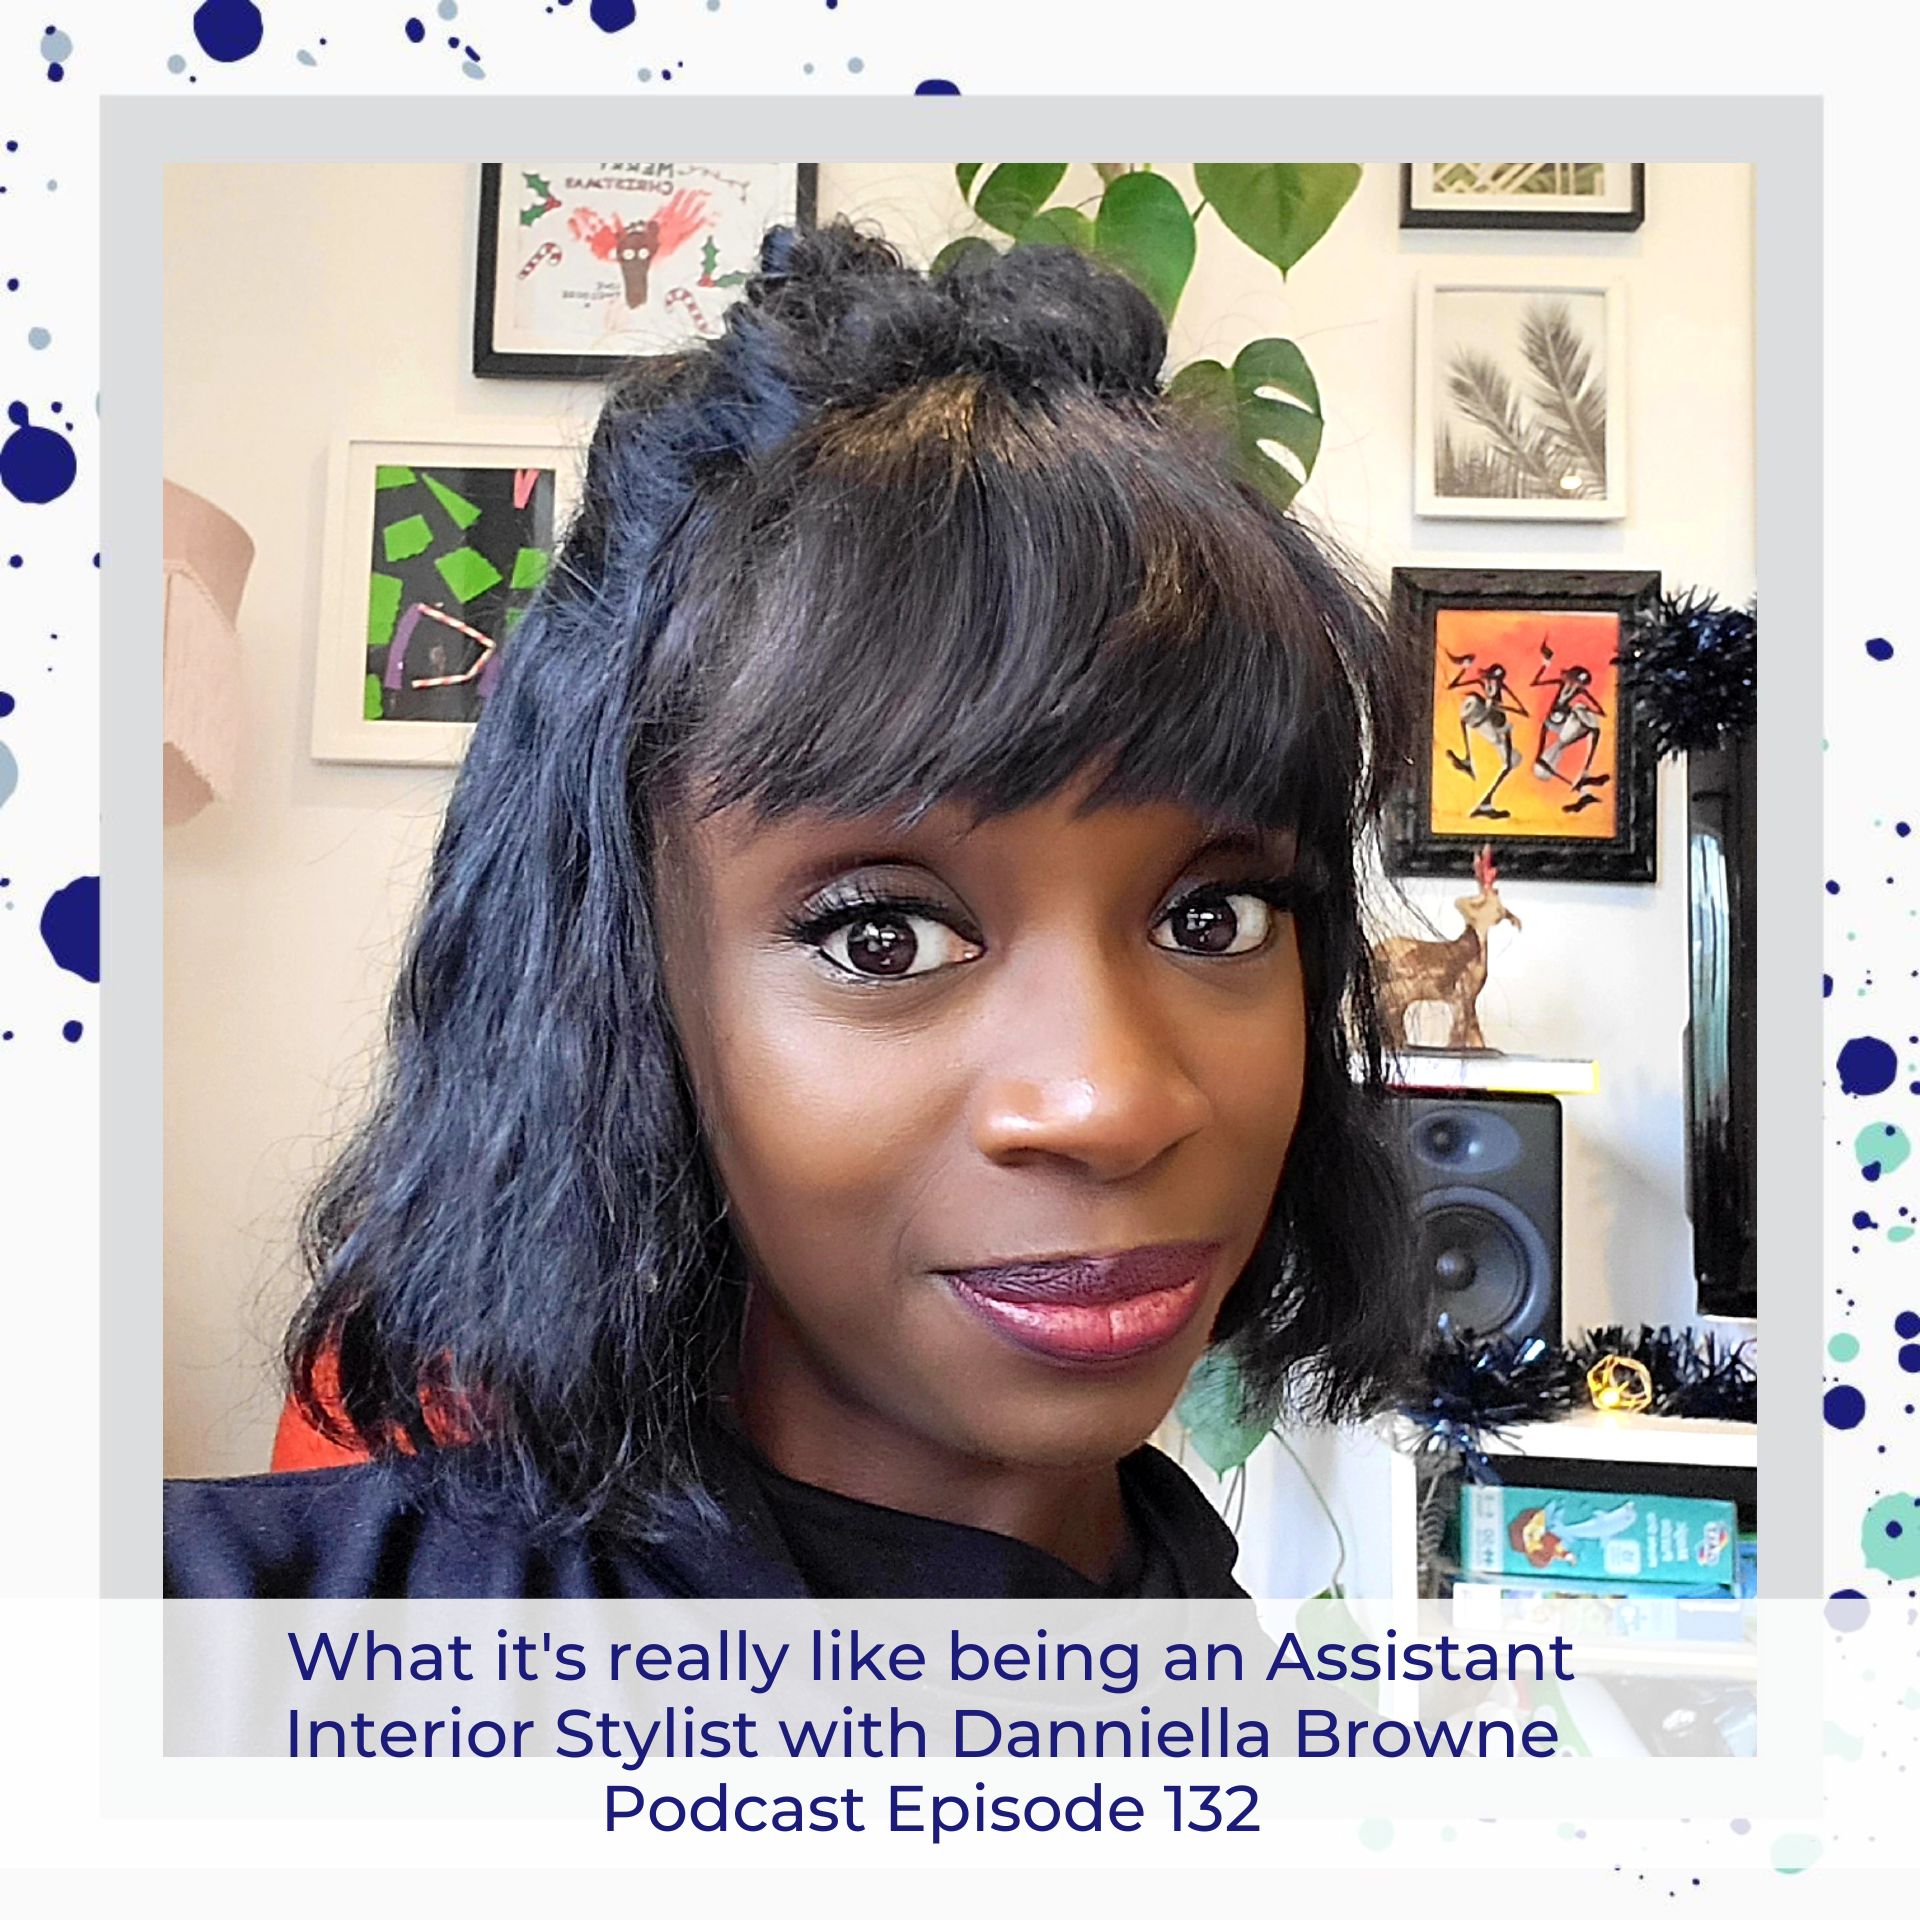 Danniella Browne Assistant Interior Stylist chats on the Inside Stylists Podcast 